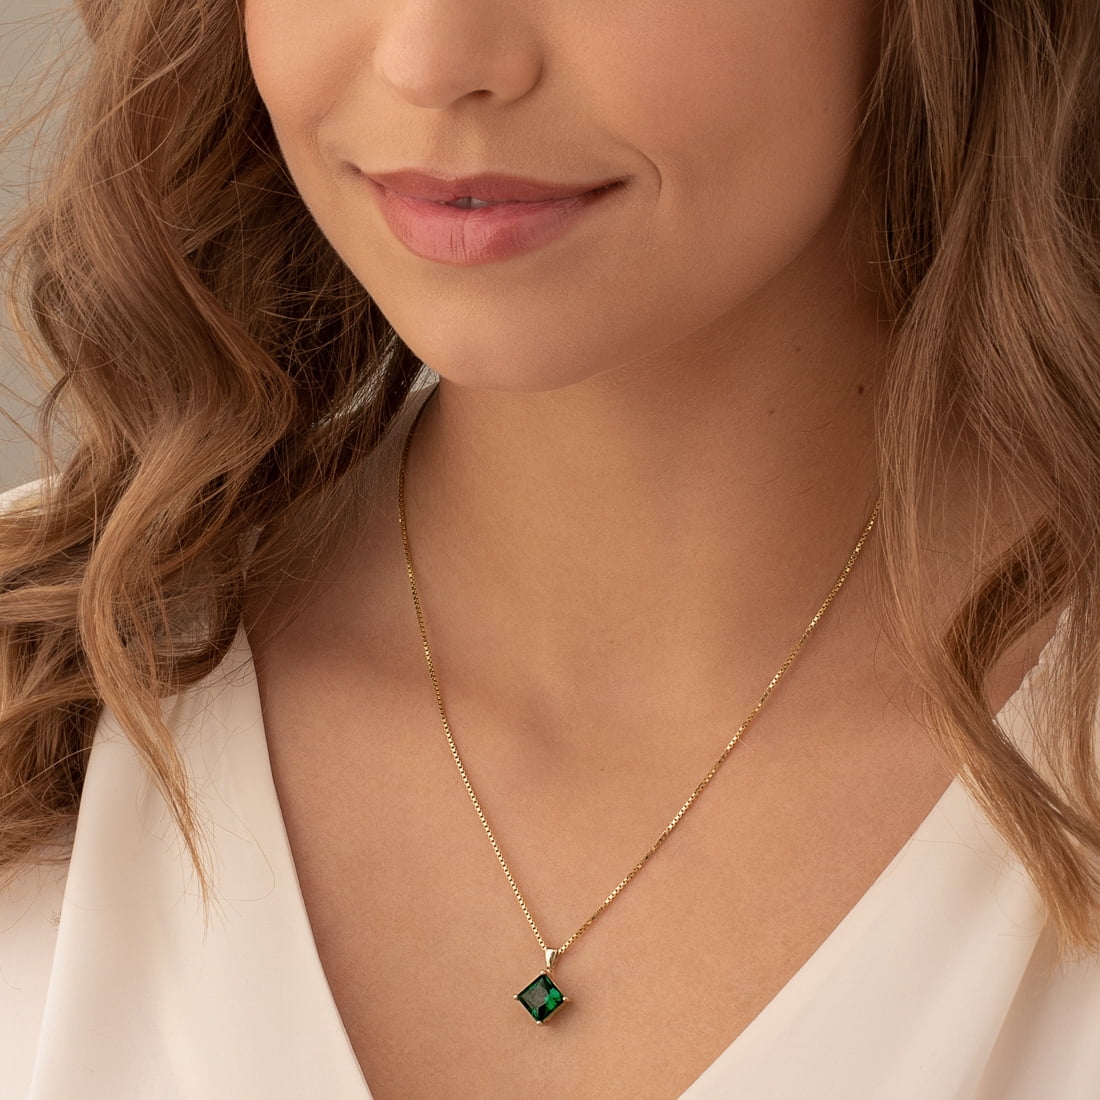 3.0cts Sterling Silver, Natural Emerald Necklace, Dark Green Emerald Pendant ,emerald Cut Necklace,natural Emerald Jewelry May Birthstone - Etsy | Emerald  necklace, Jewelry necklace simple, Emerald pendant